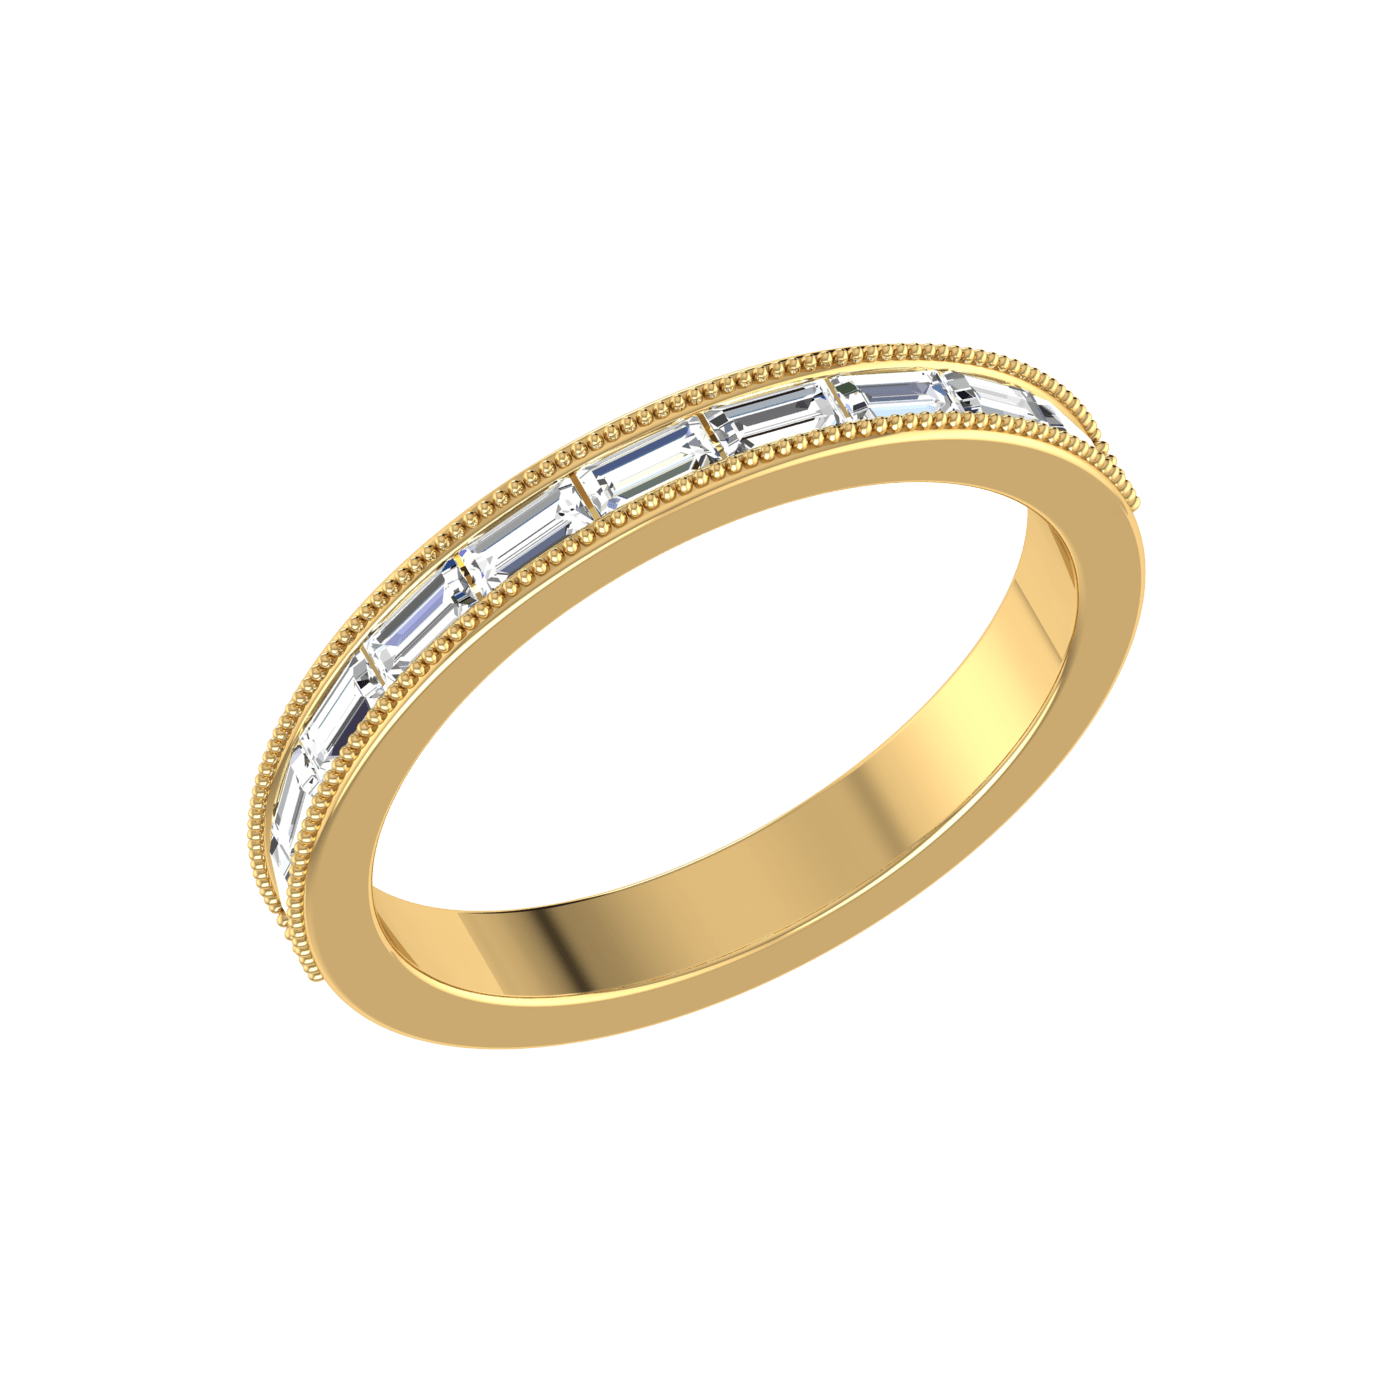 Gold Promise Ring | Purity Rings | Christian Rings | Elevated Faith